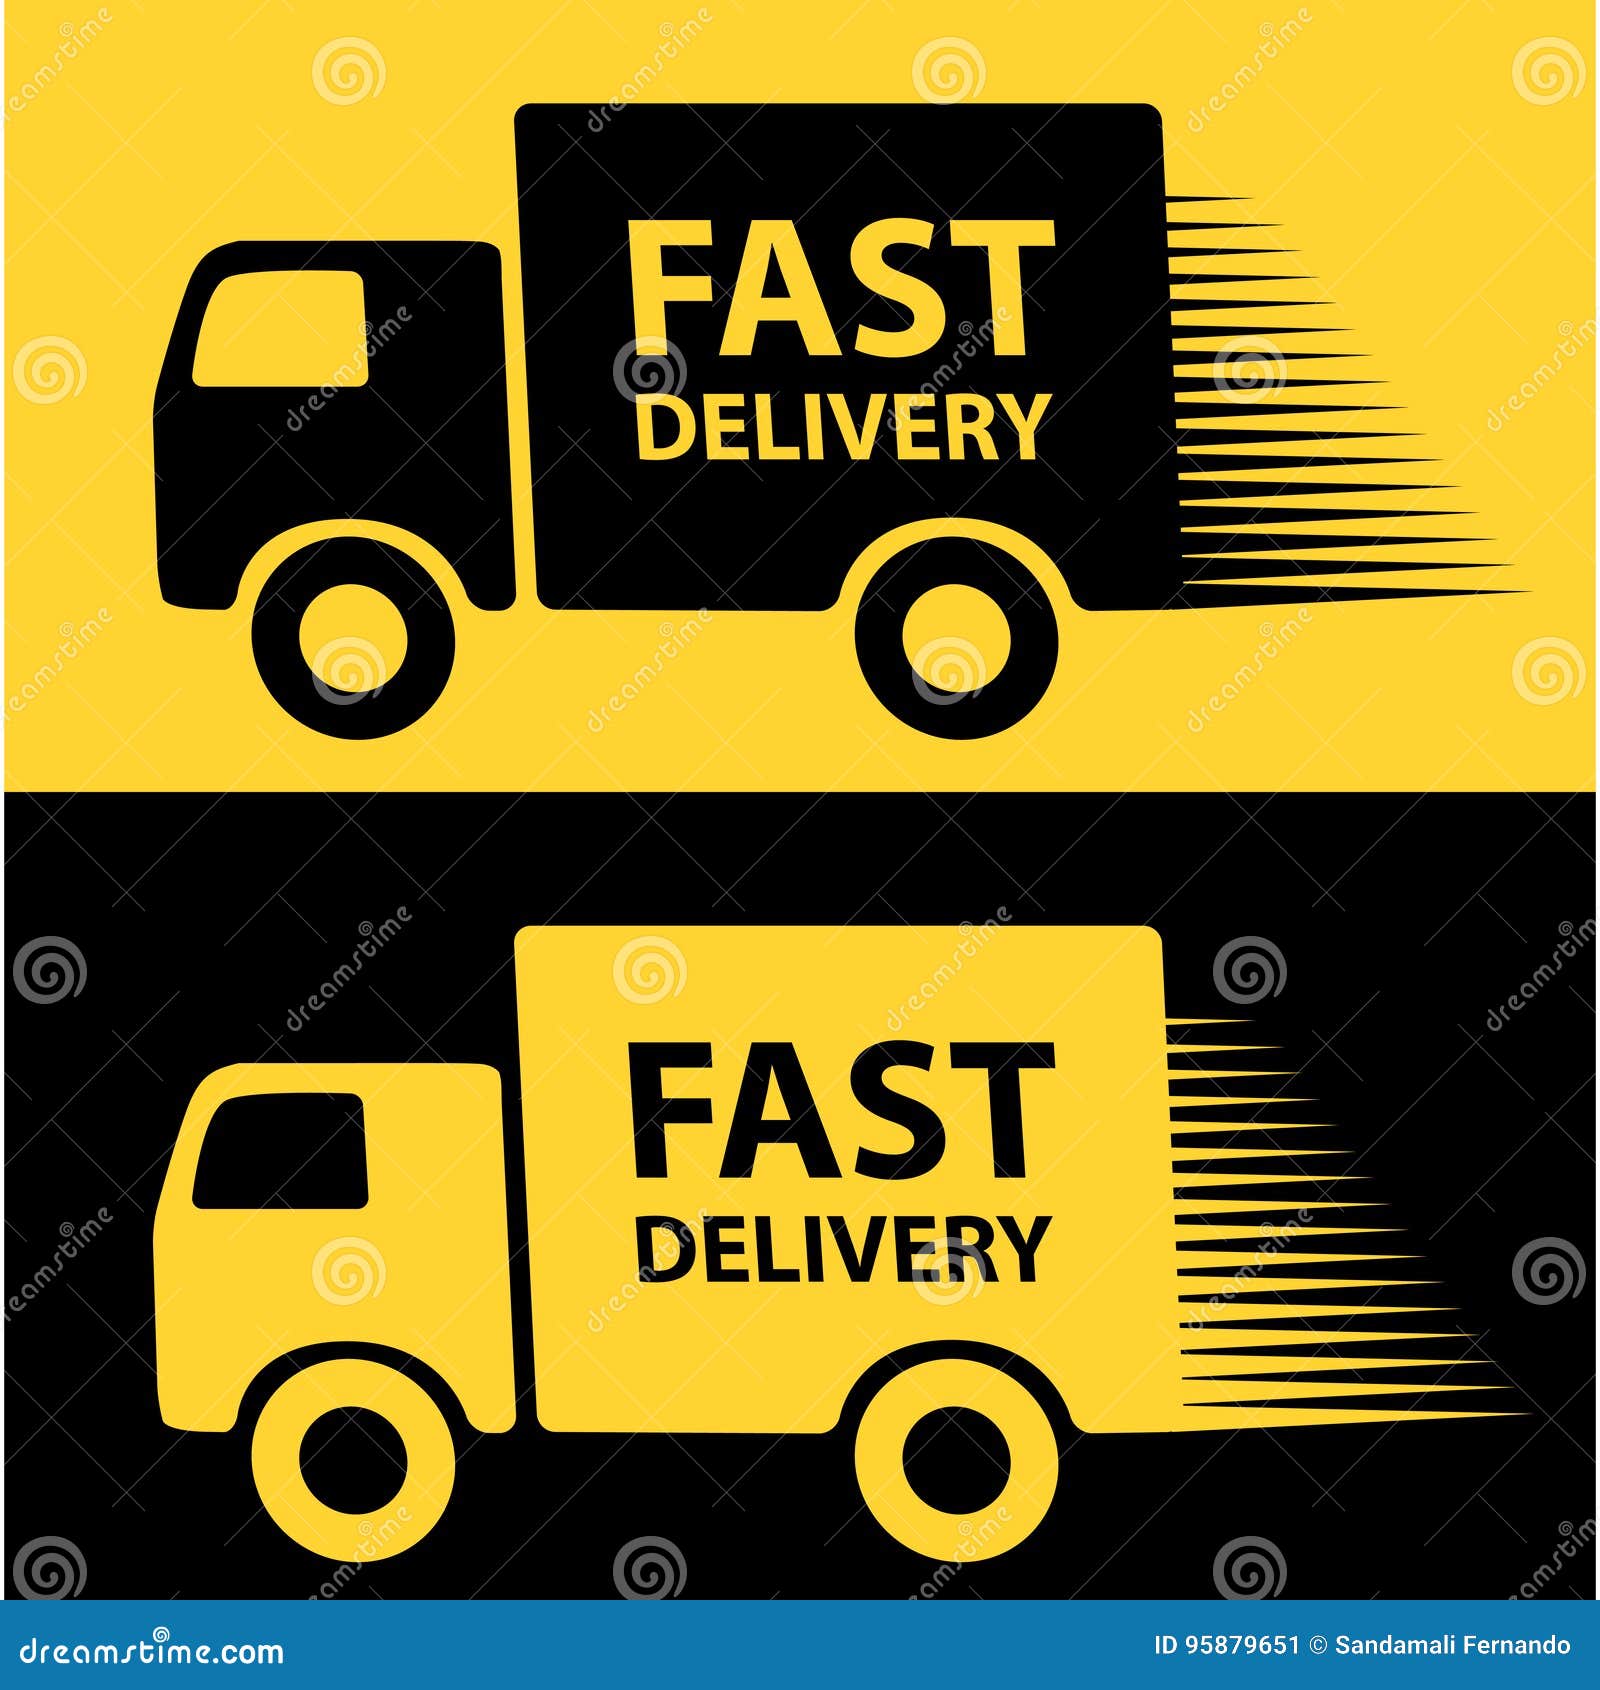 Fast delivery stock illustration. Illustration of cargo - 95879651